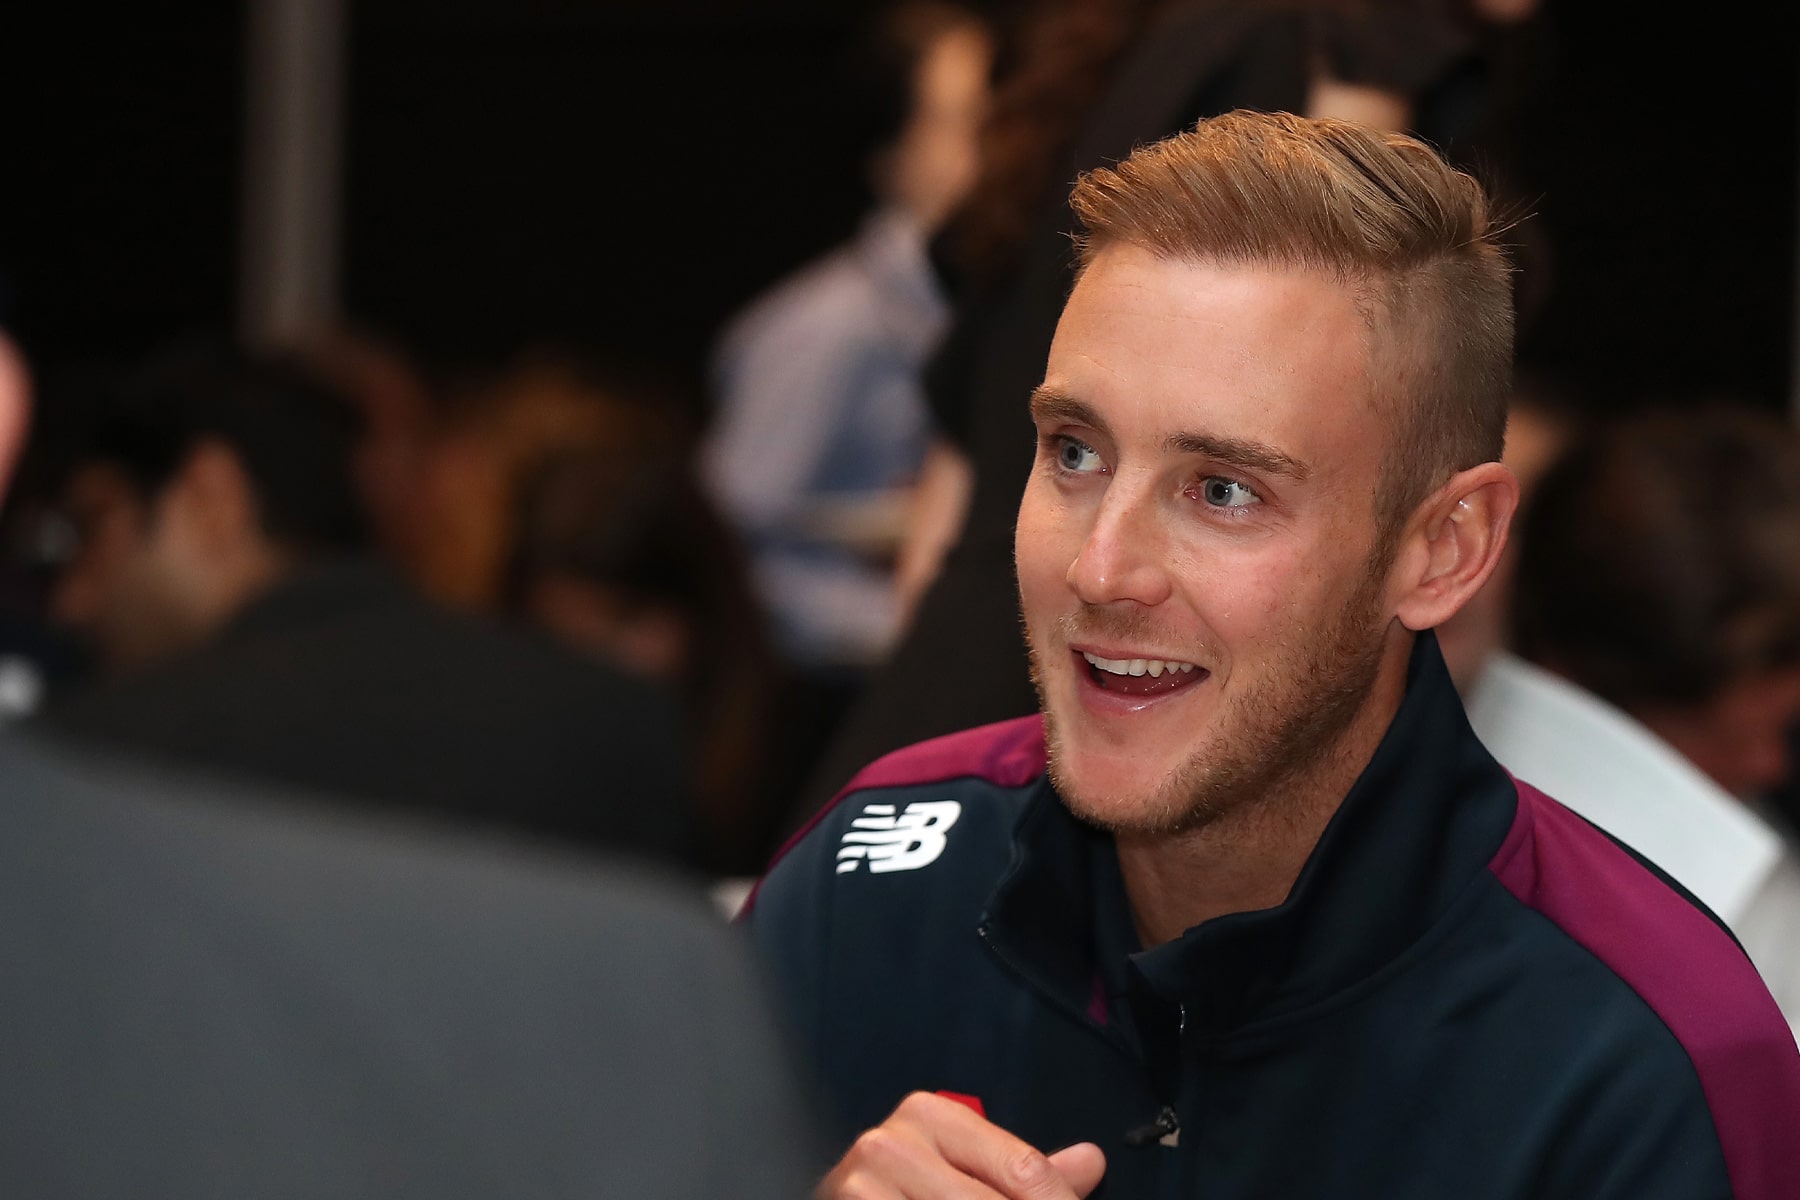 Trust “critical for players” – Broad